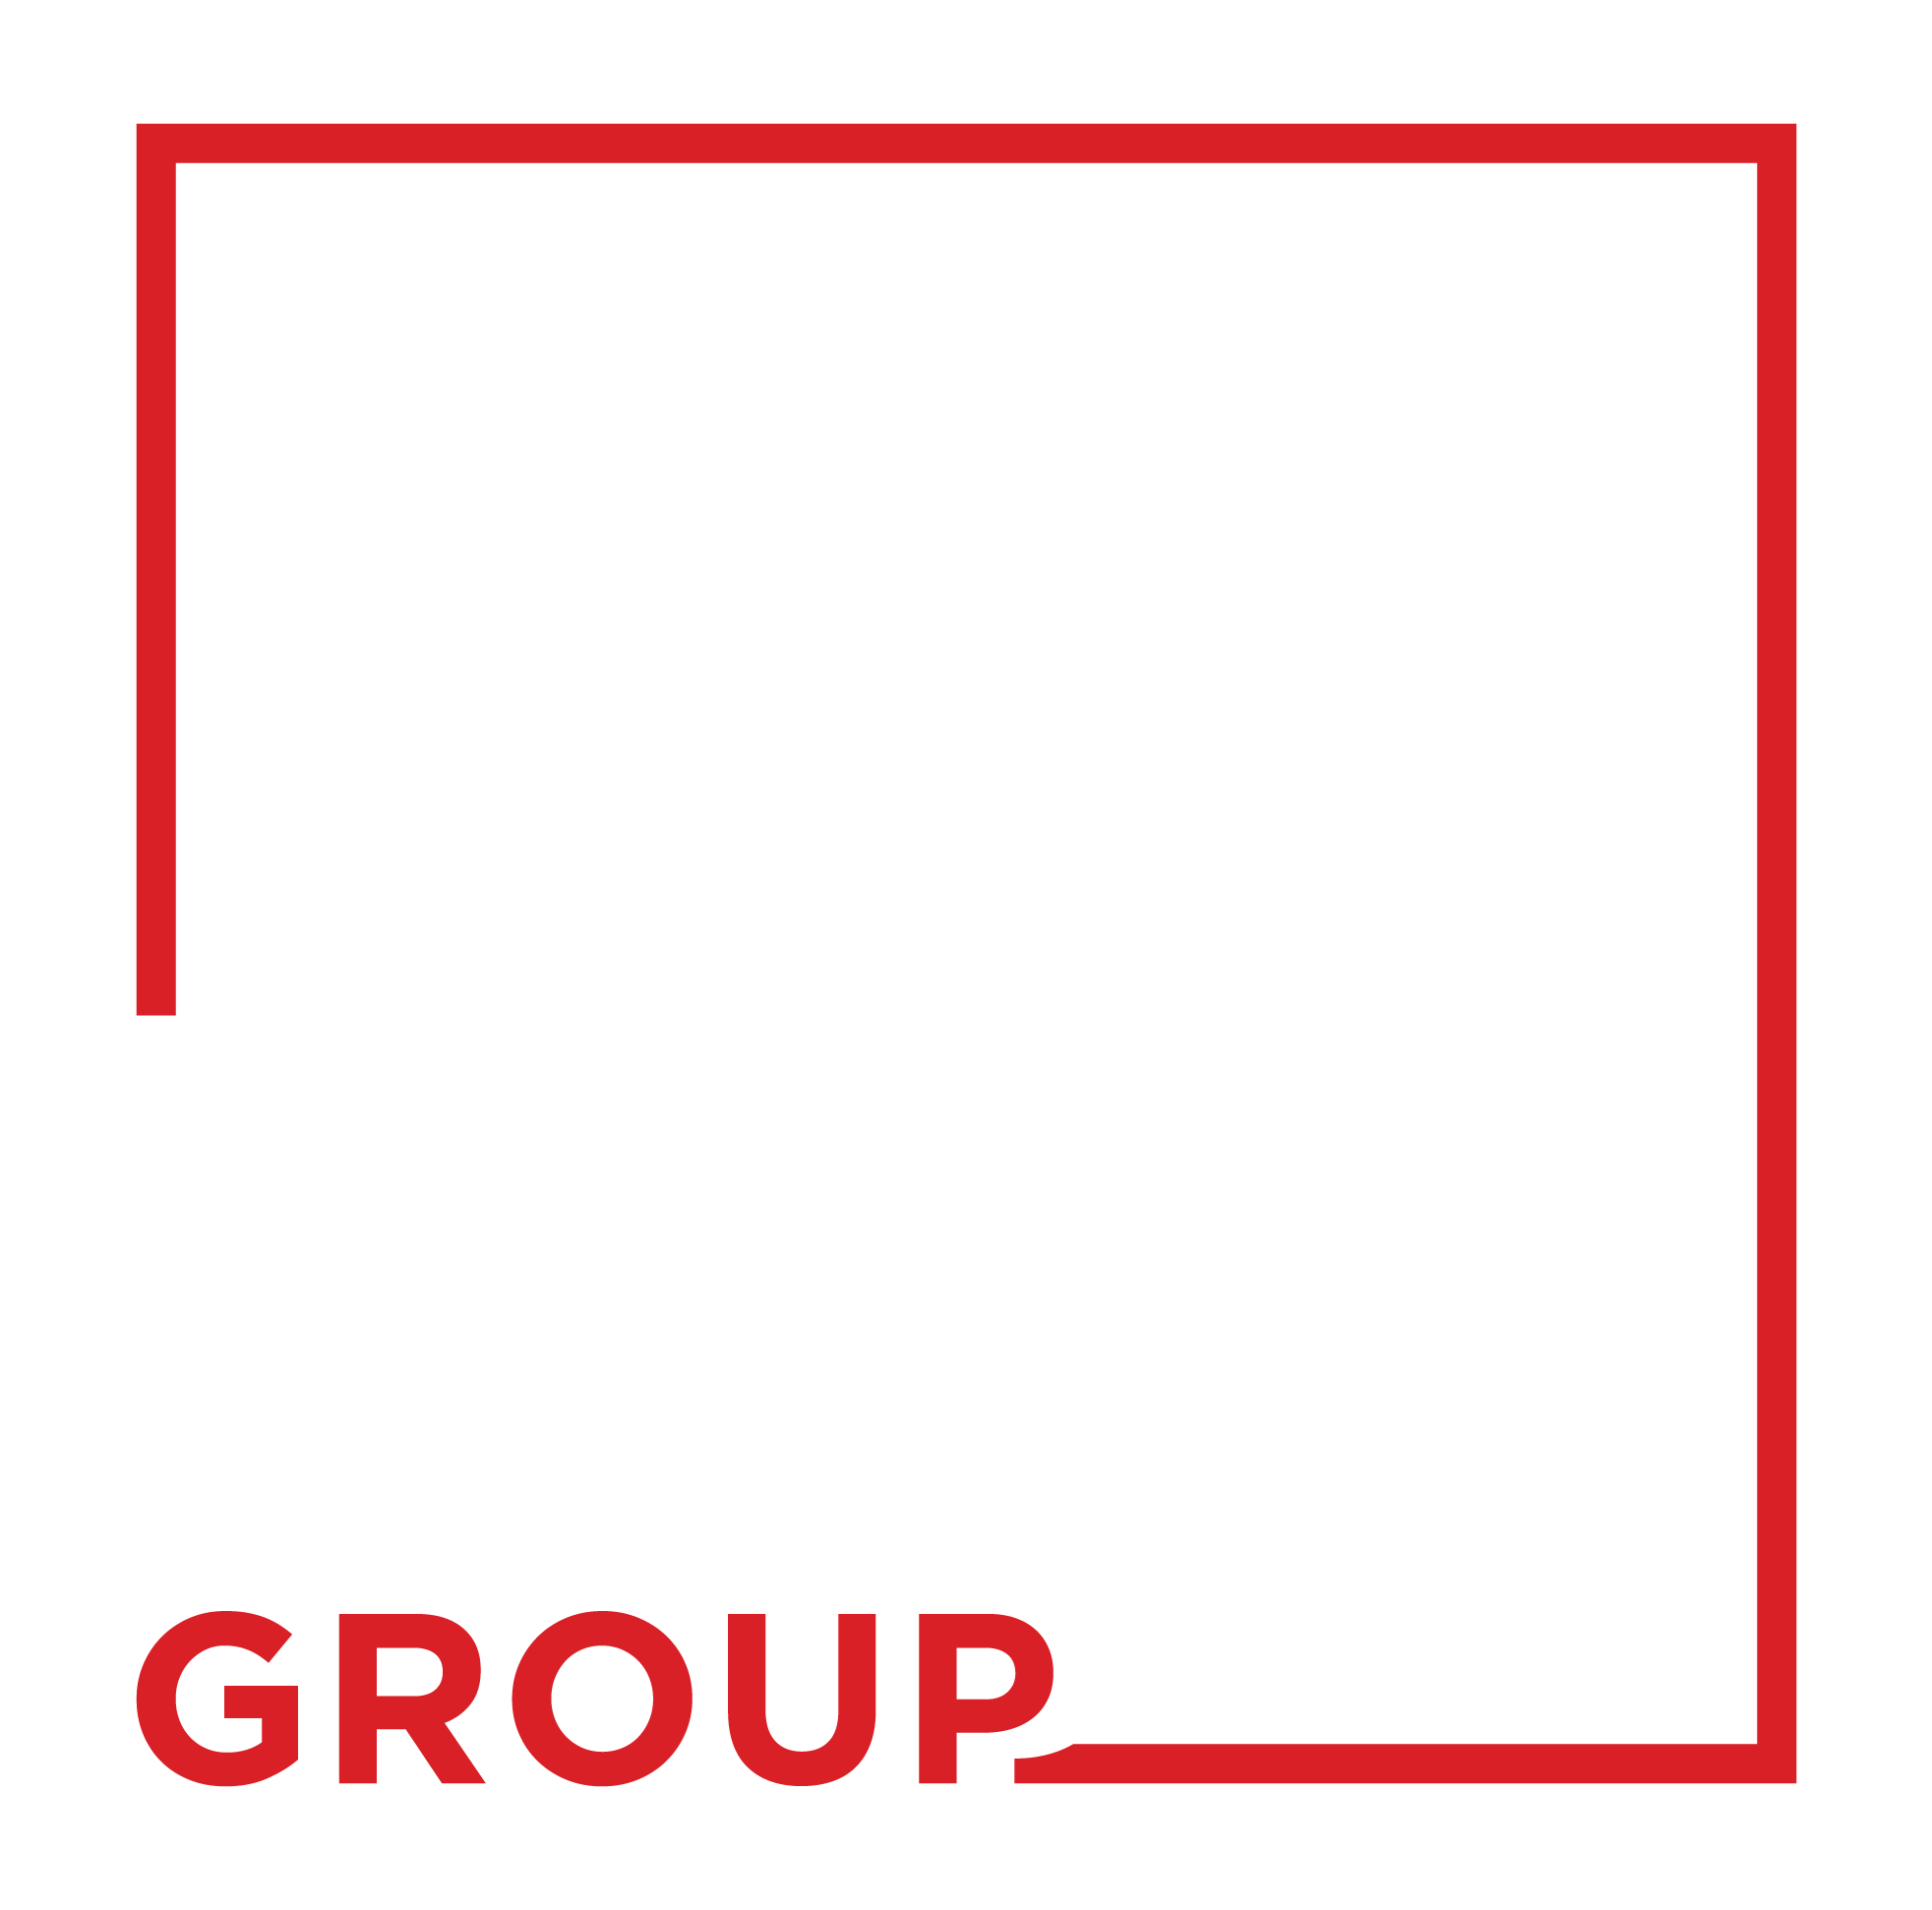 Industry Property Group